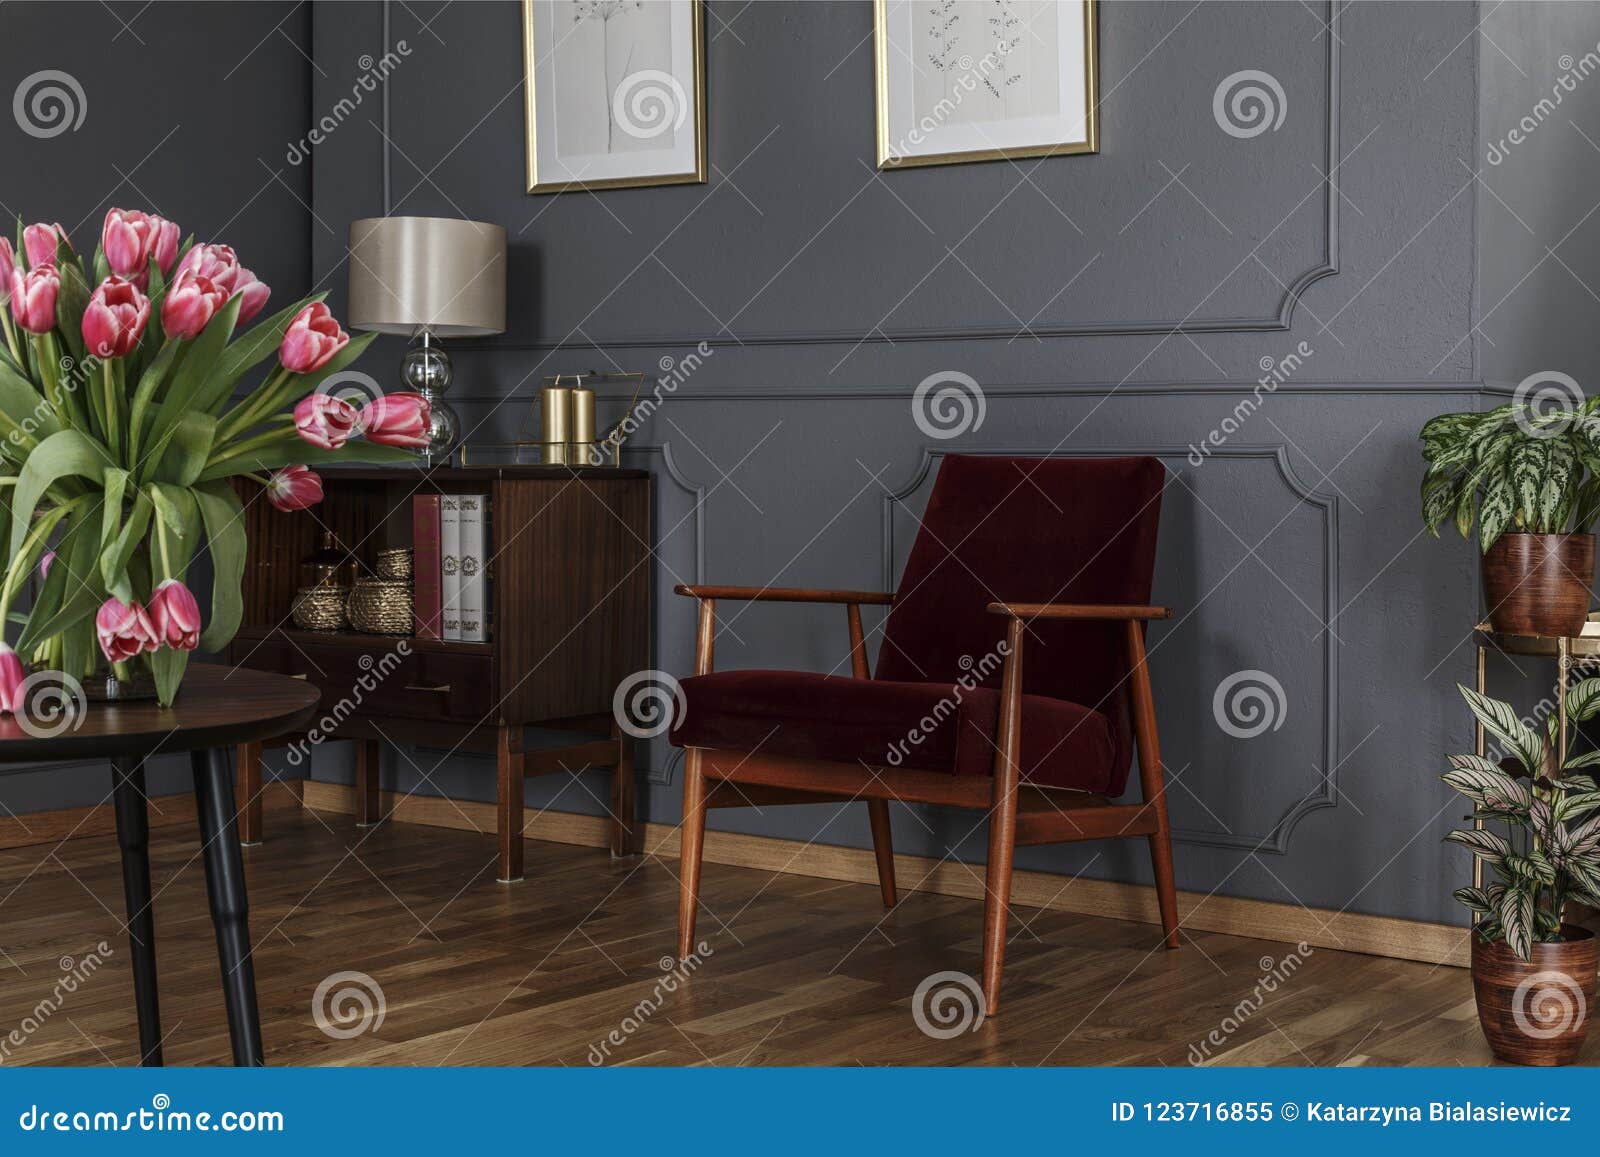 grey living room interior with wainscoting on the wall, wooden c